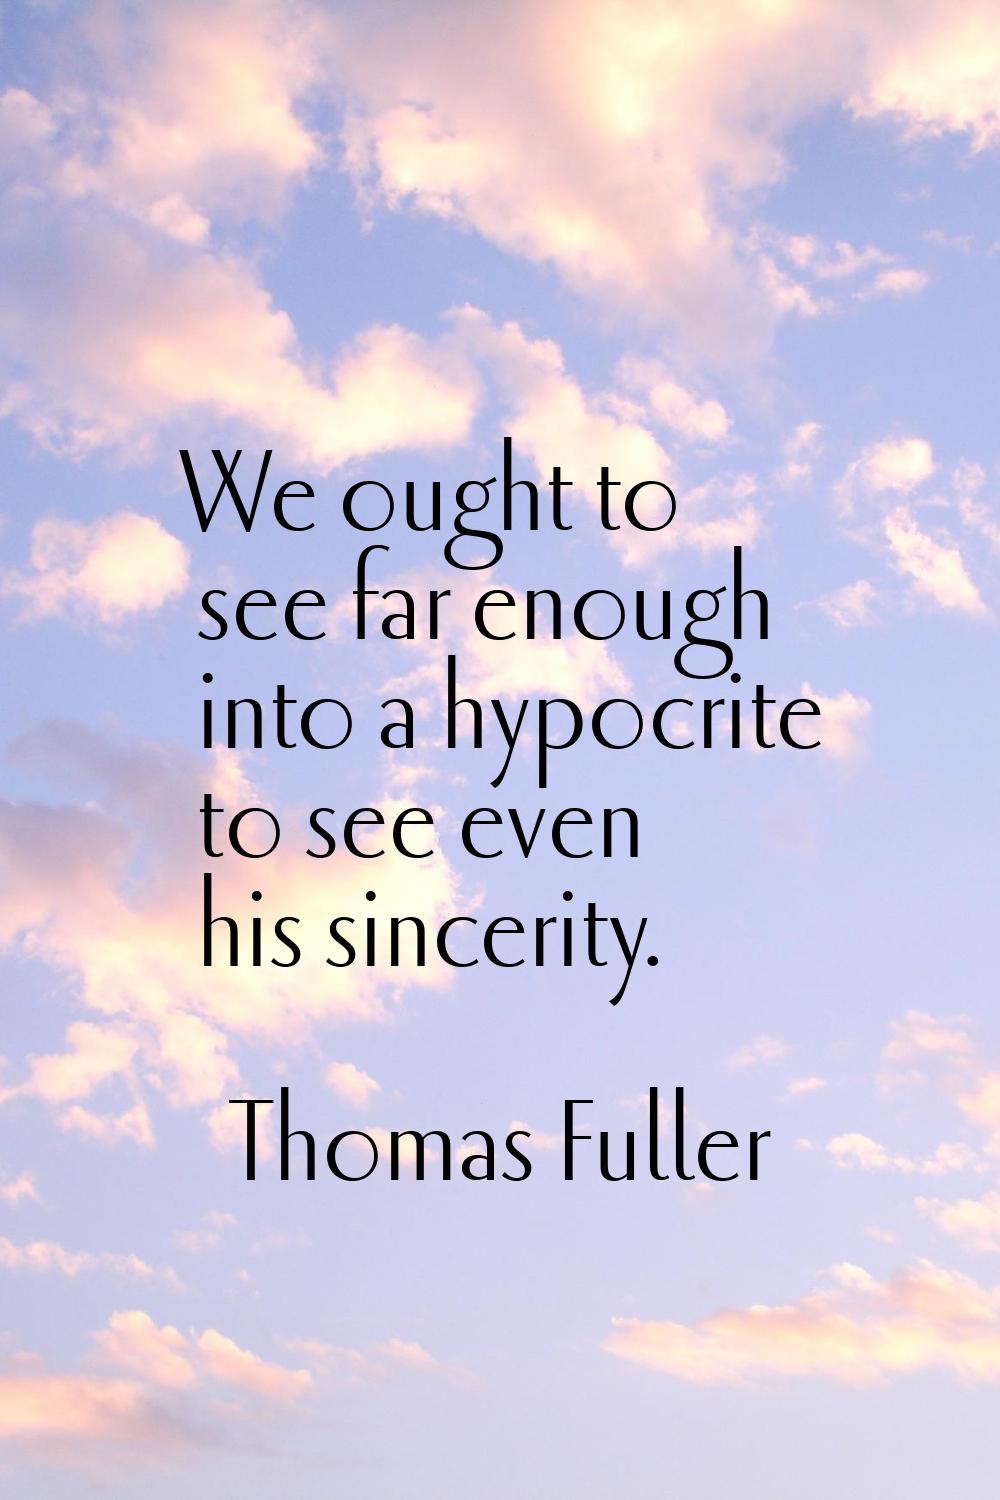 We ought to see far enough into a hypocrite to see even his sincerity.